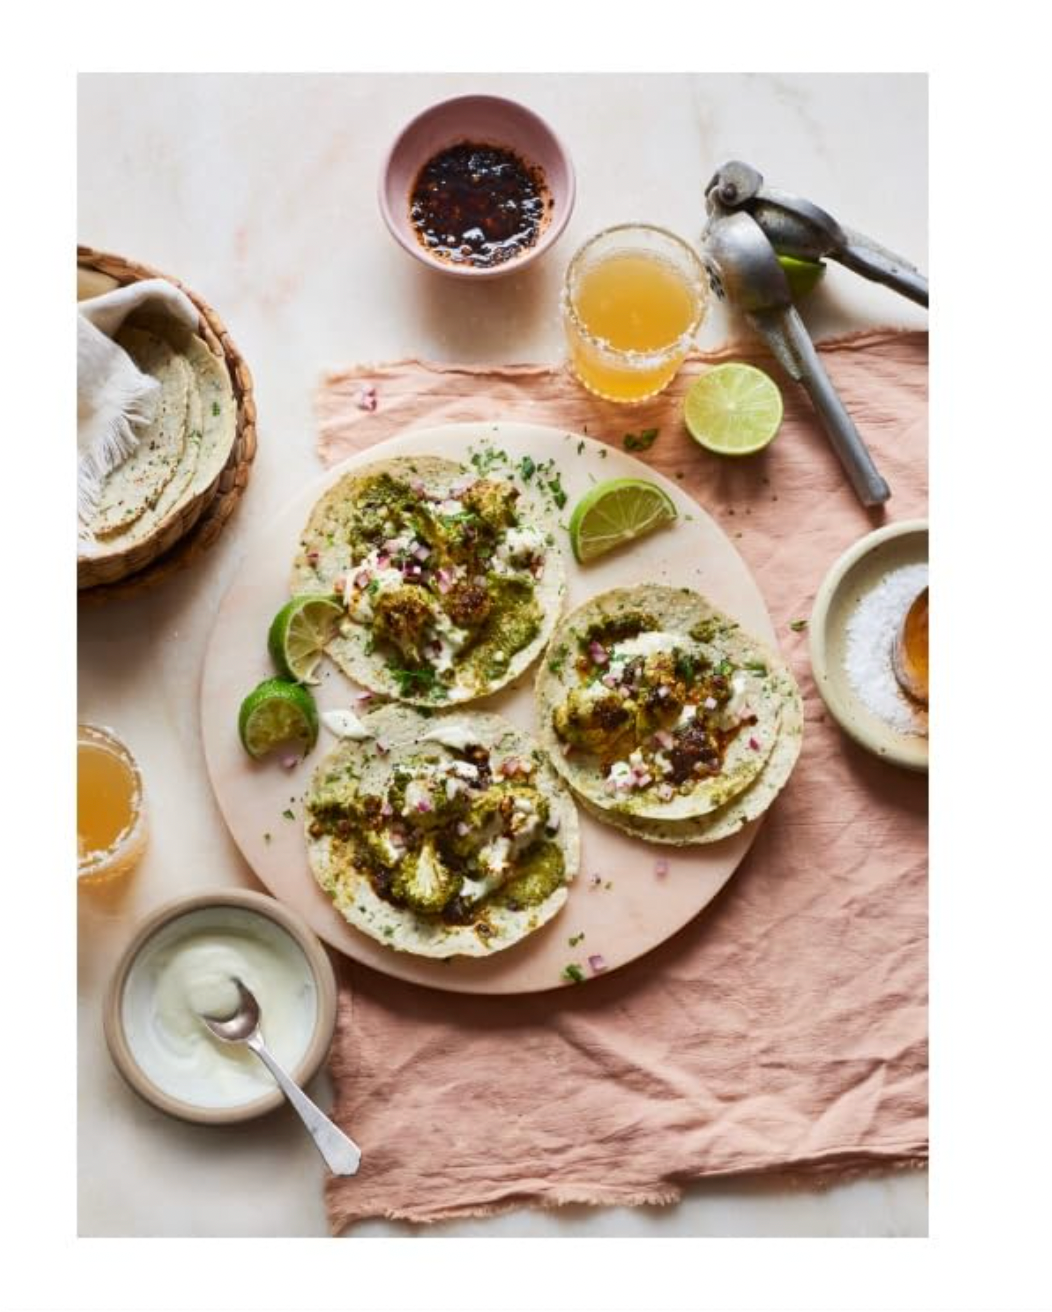 Sobremesa: Tasty Mexican Recipes for Every Day